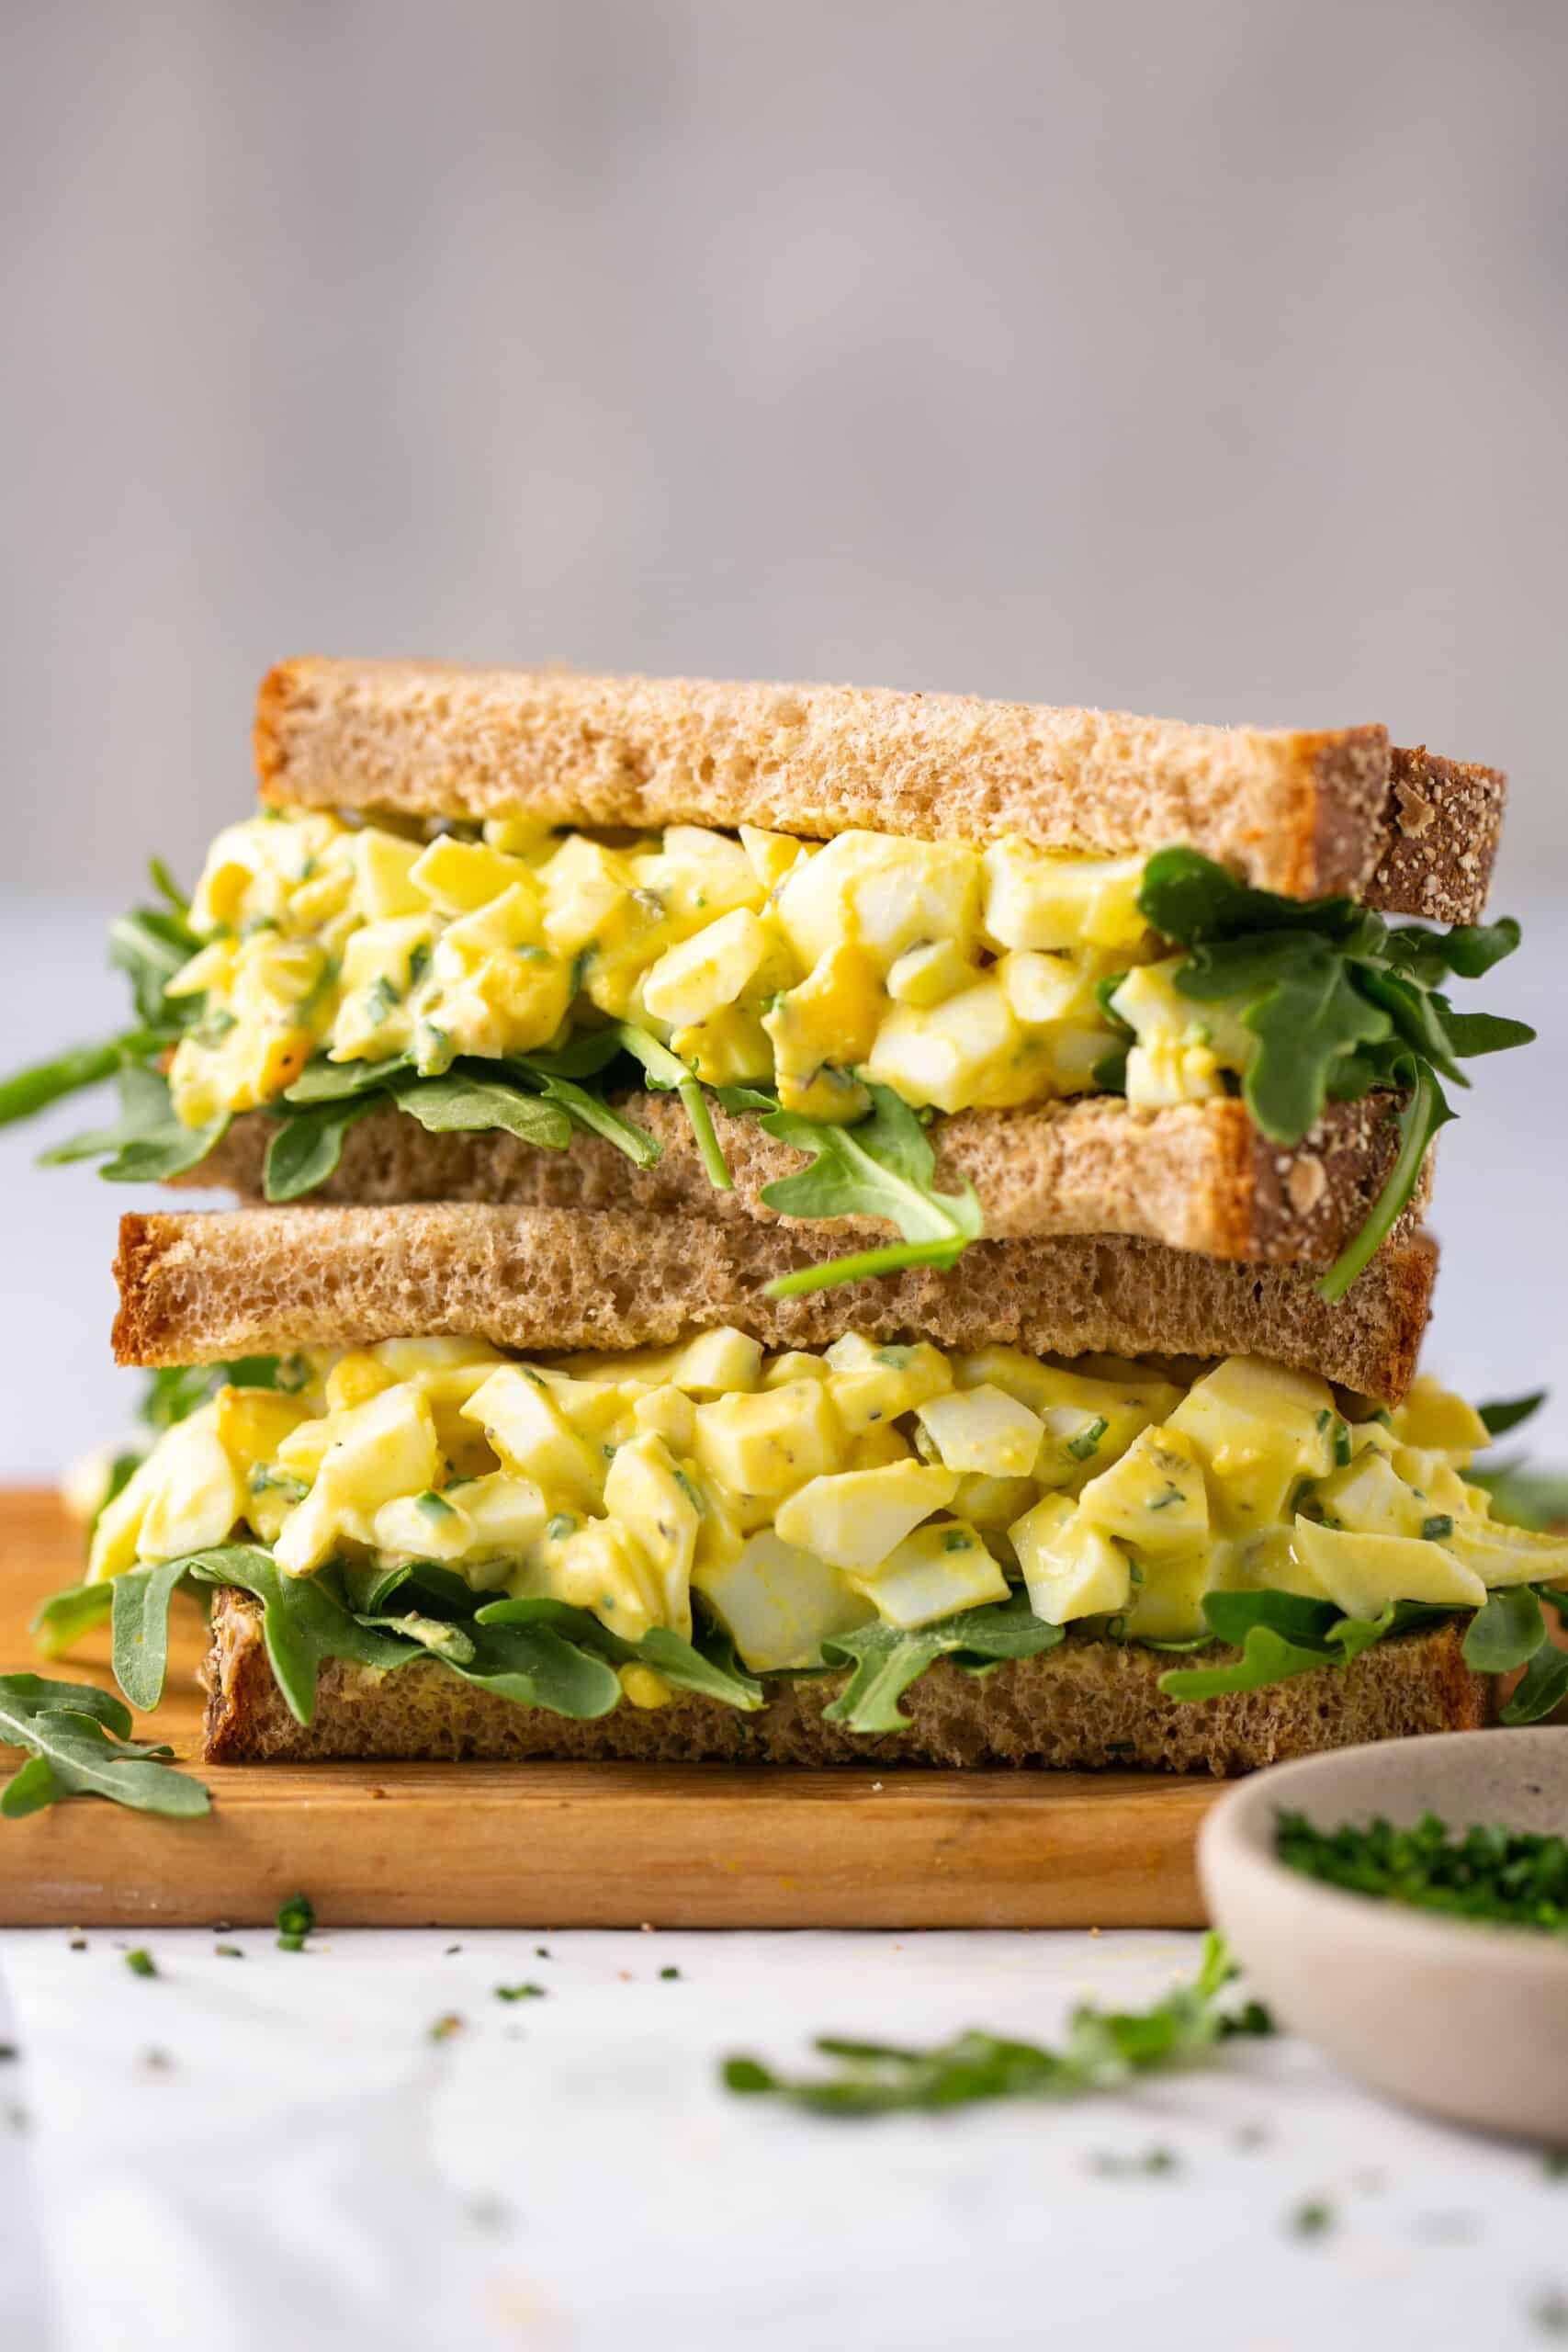 Low calorie egg salad on a sandwich with greens, cut in halves and stacked vertically.